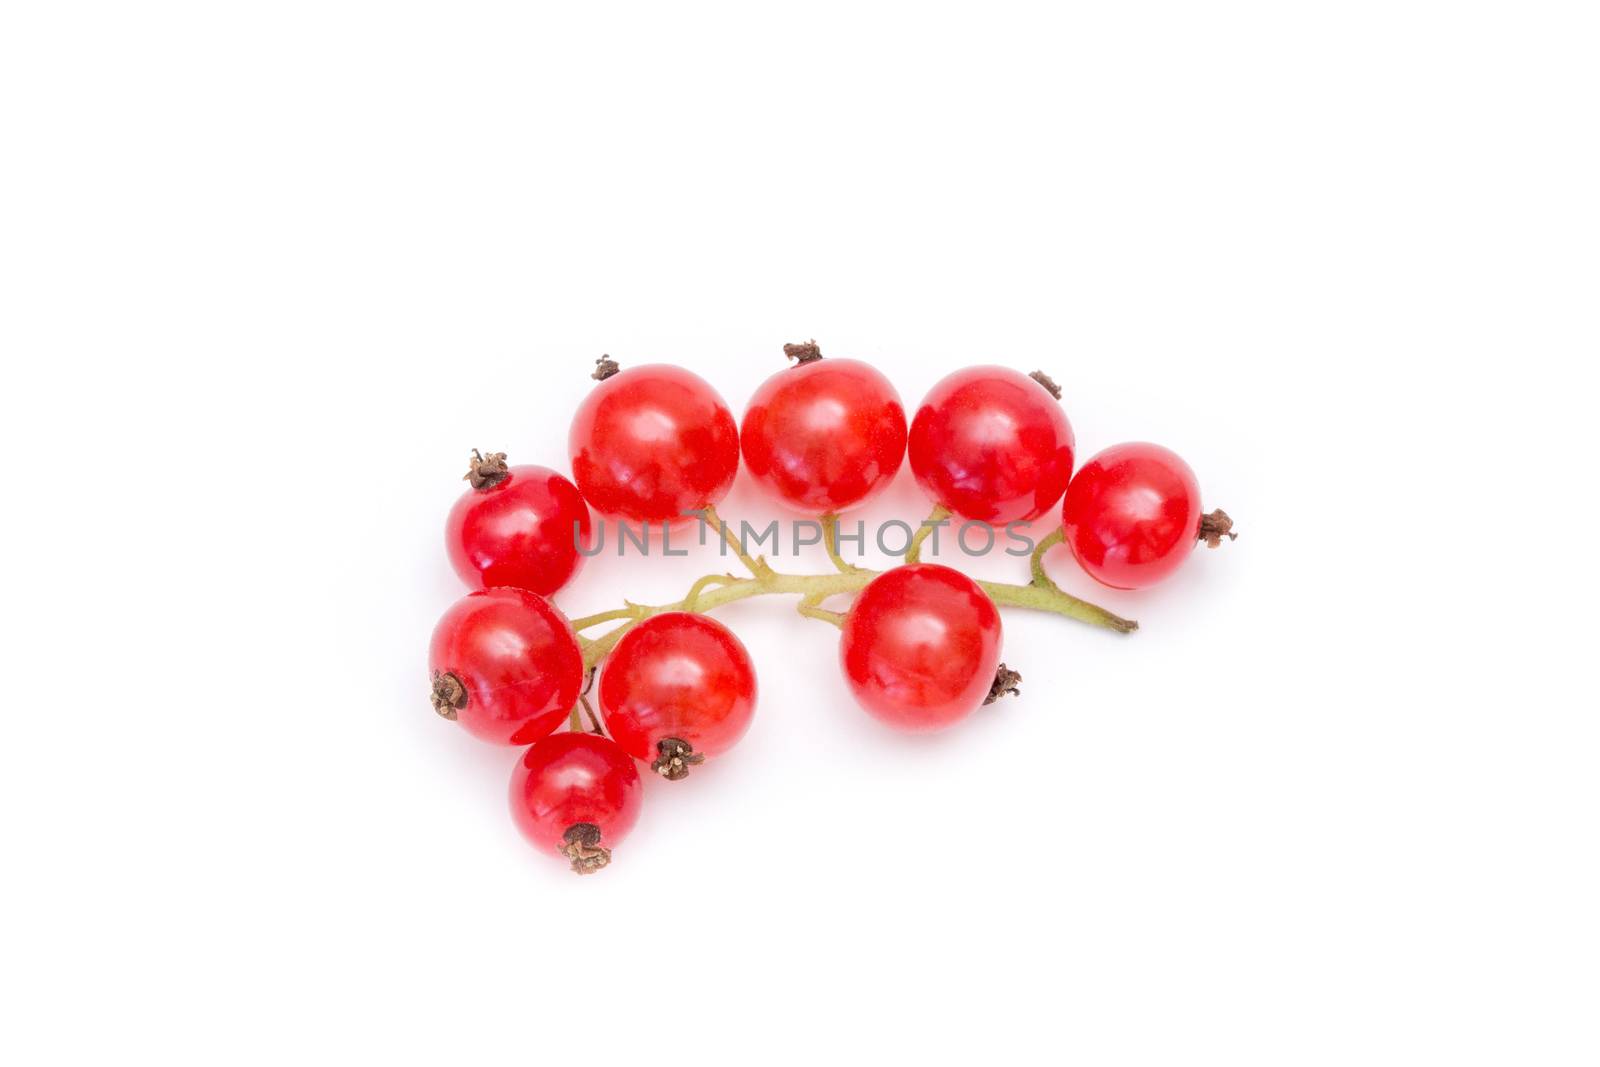 Red currant closeup isolated on white background